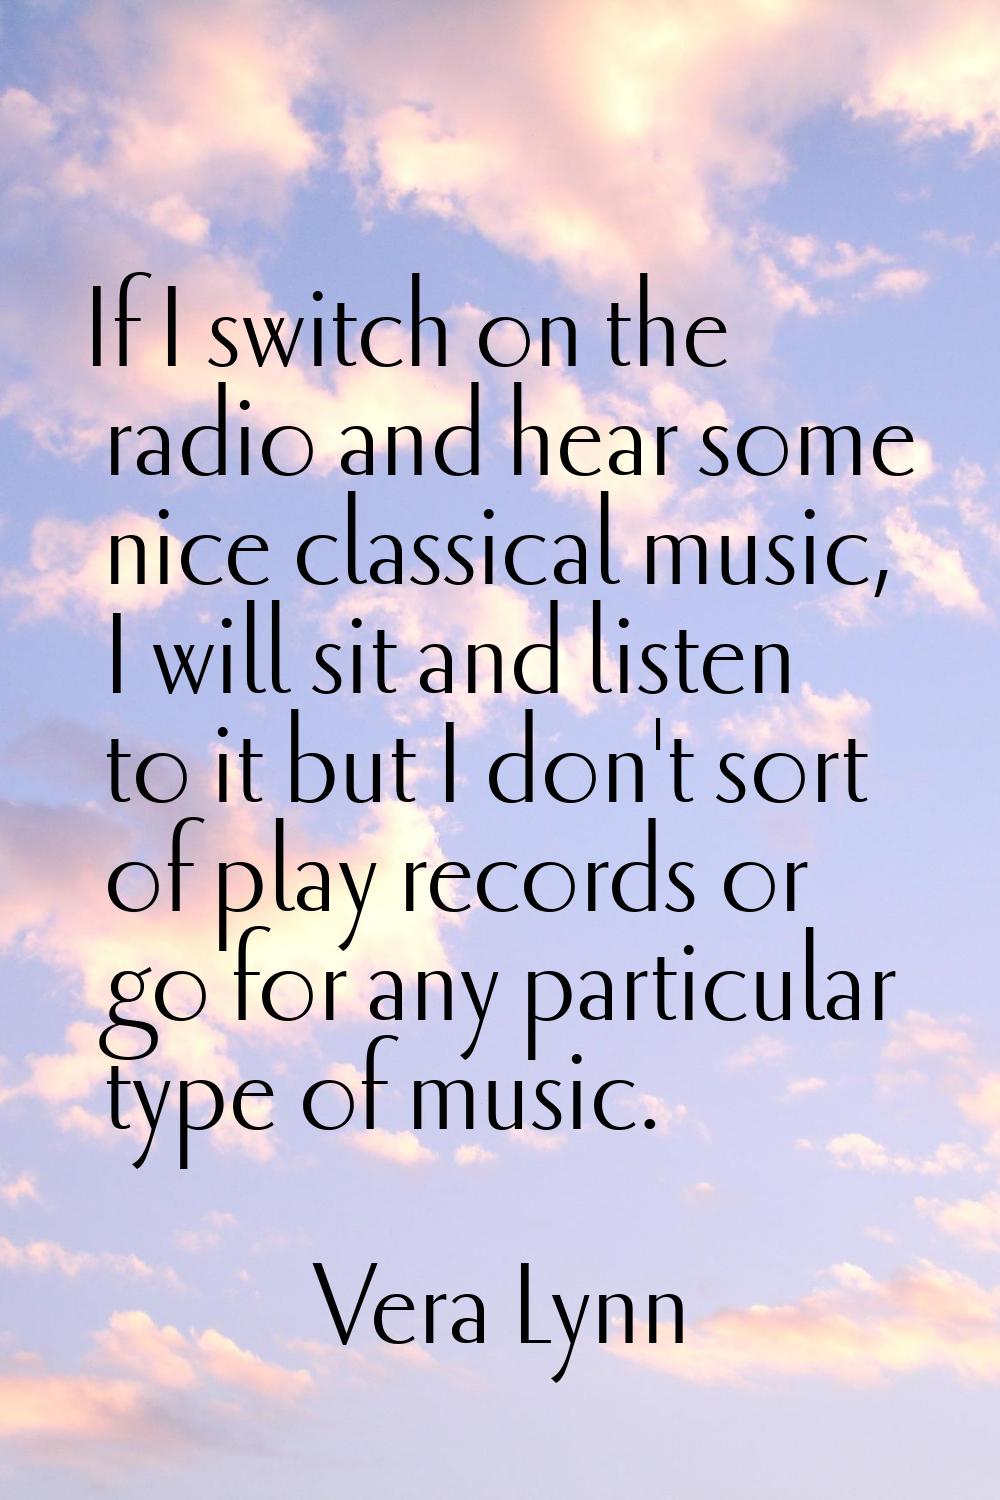 If I switch on the radio and hear some nice classical music, I will sit and listen to it but I don'